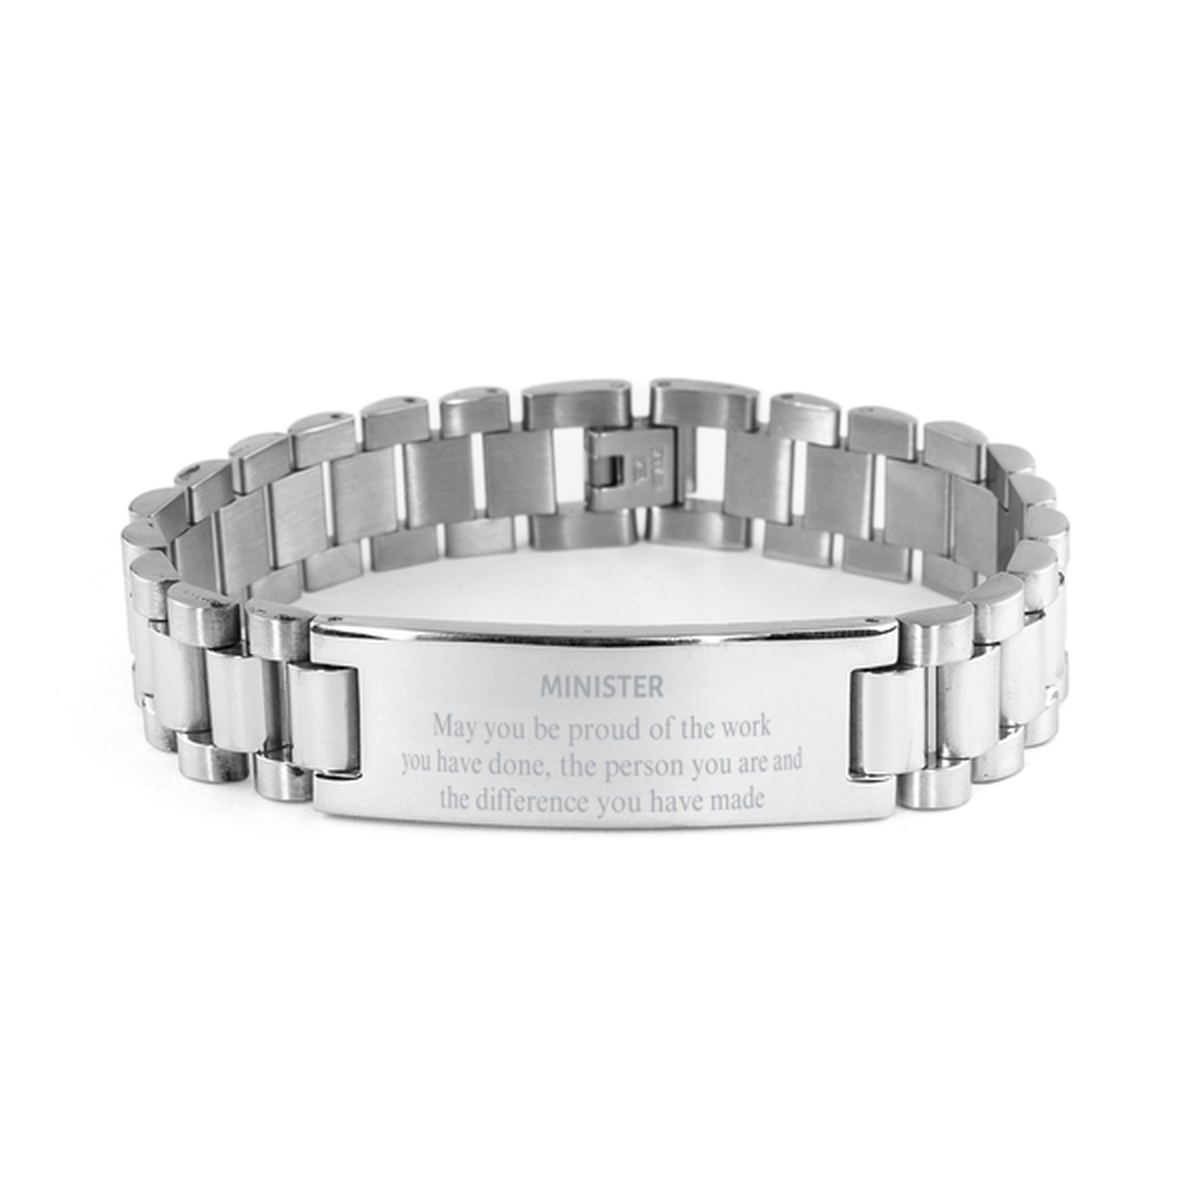 Minister May you be proud of the work you have done, Retirement Minister Ladder Stainless Steel Bracelet for Colleague Appreciation Gifts Amazing for Minister